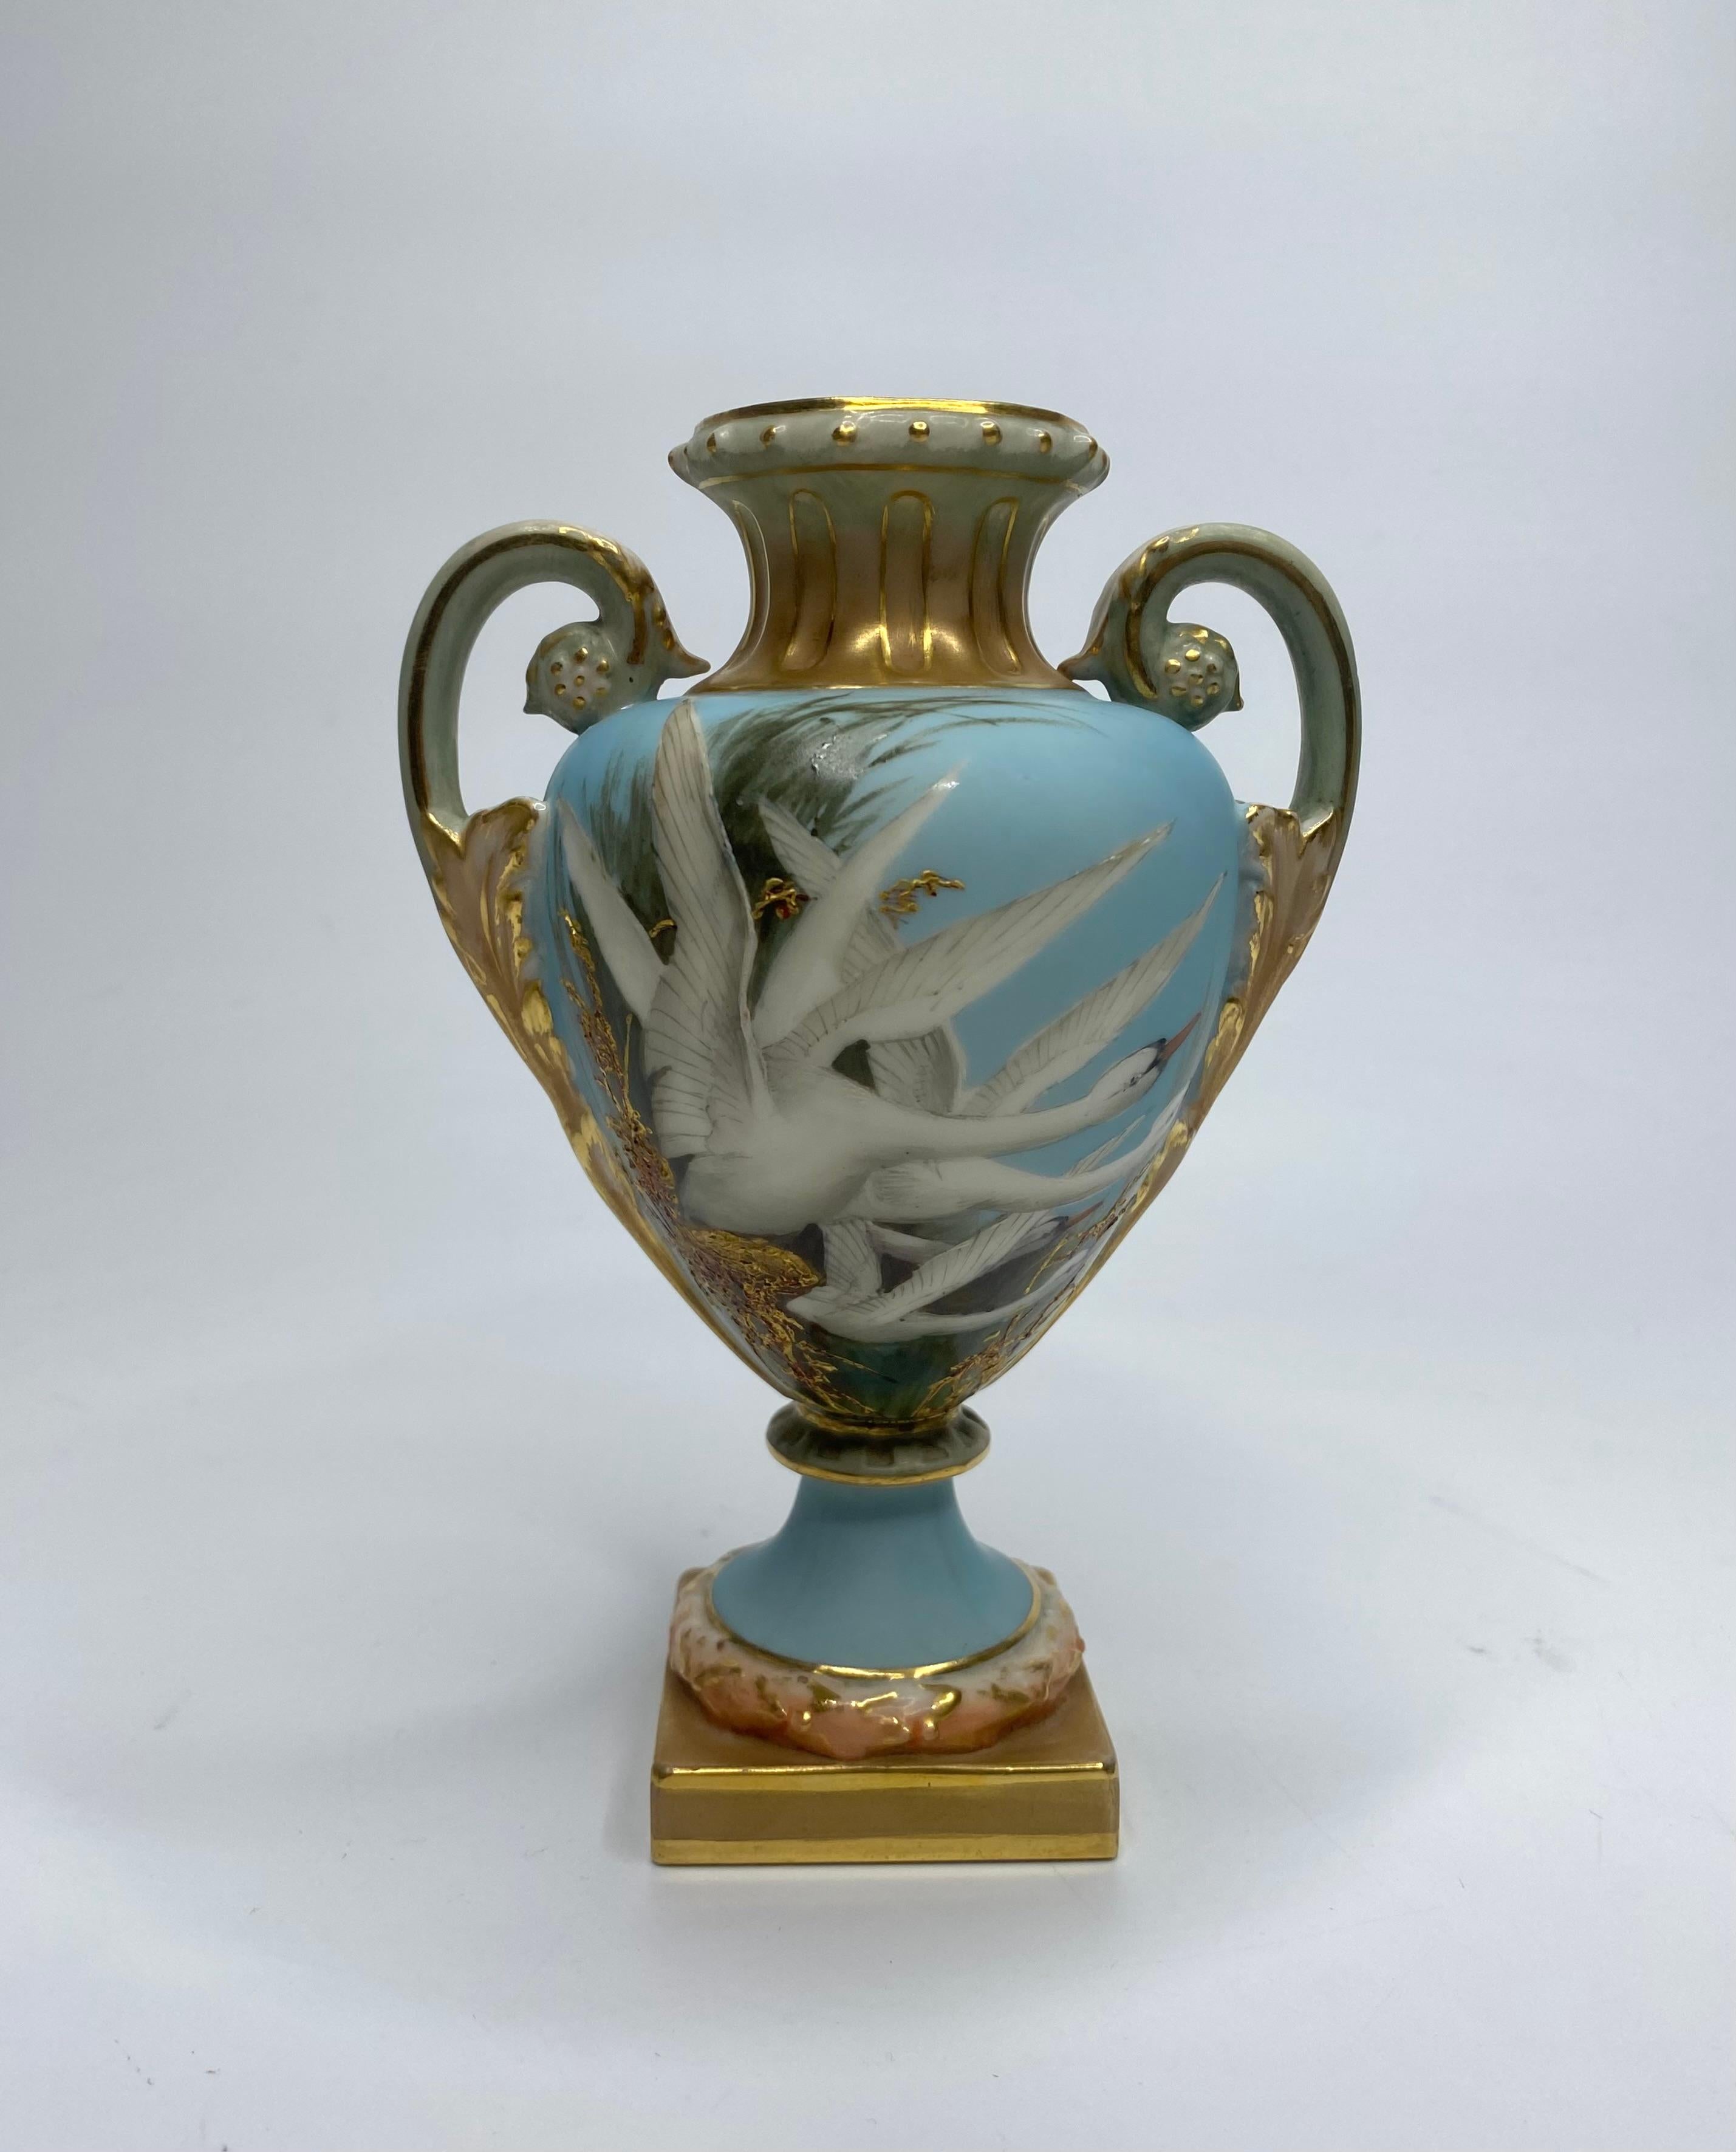 Early 20th Century Royal Worcester porcelain vases. Swans by Charles Baldwyn, d. 1904. For Sale